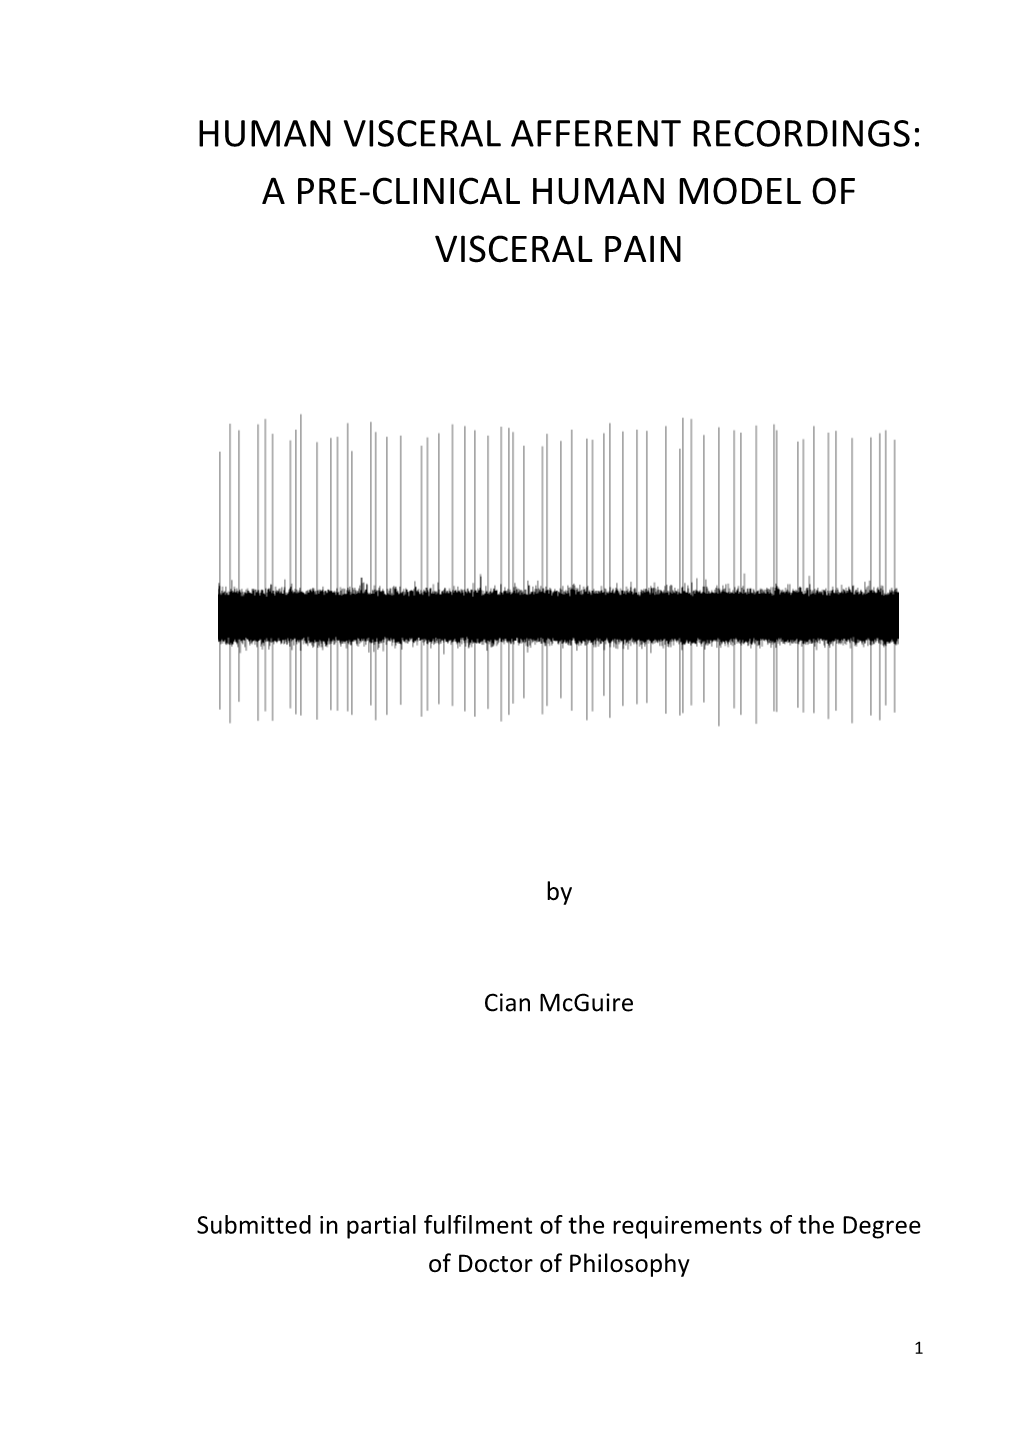 Human Visceral Afferent Recordings: a Pre-Clinical Human Model of Visceral Pain